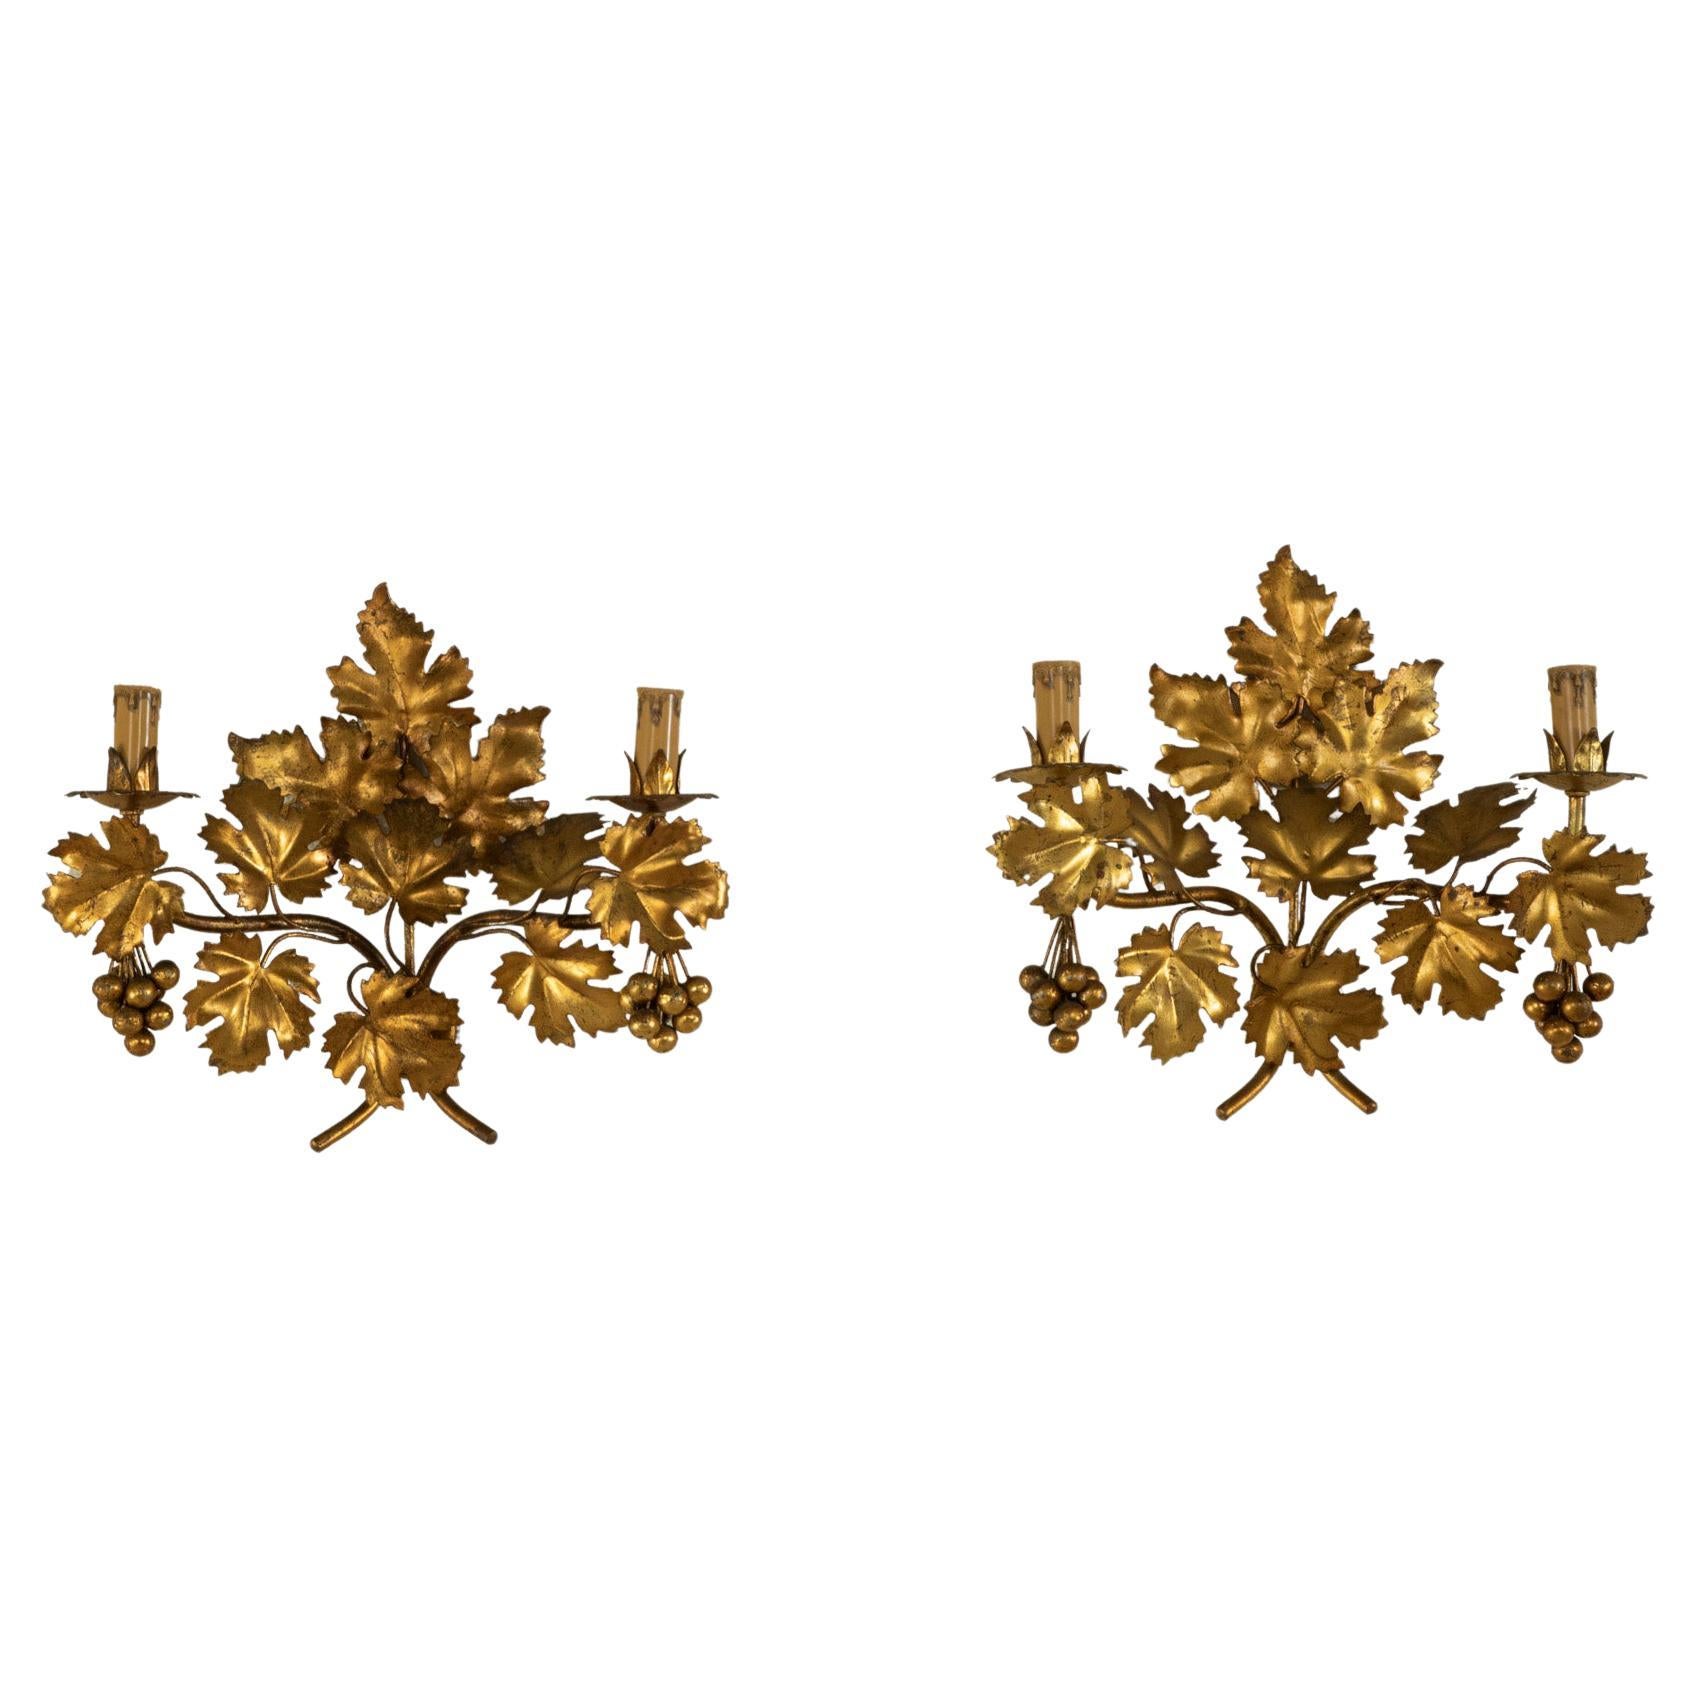 Pair of Mid-20th Century Italian Gilt Metal Sconces with Grape Leaves For Sale